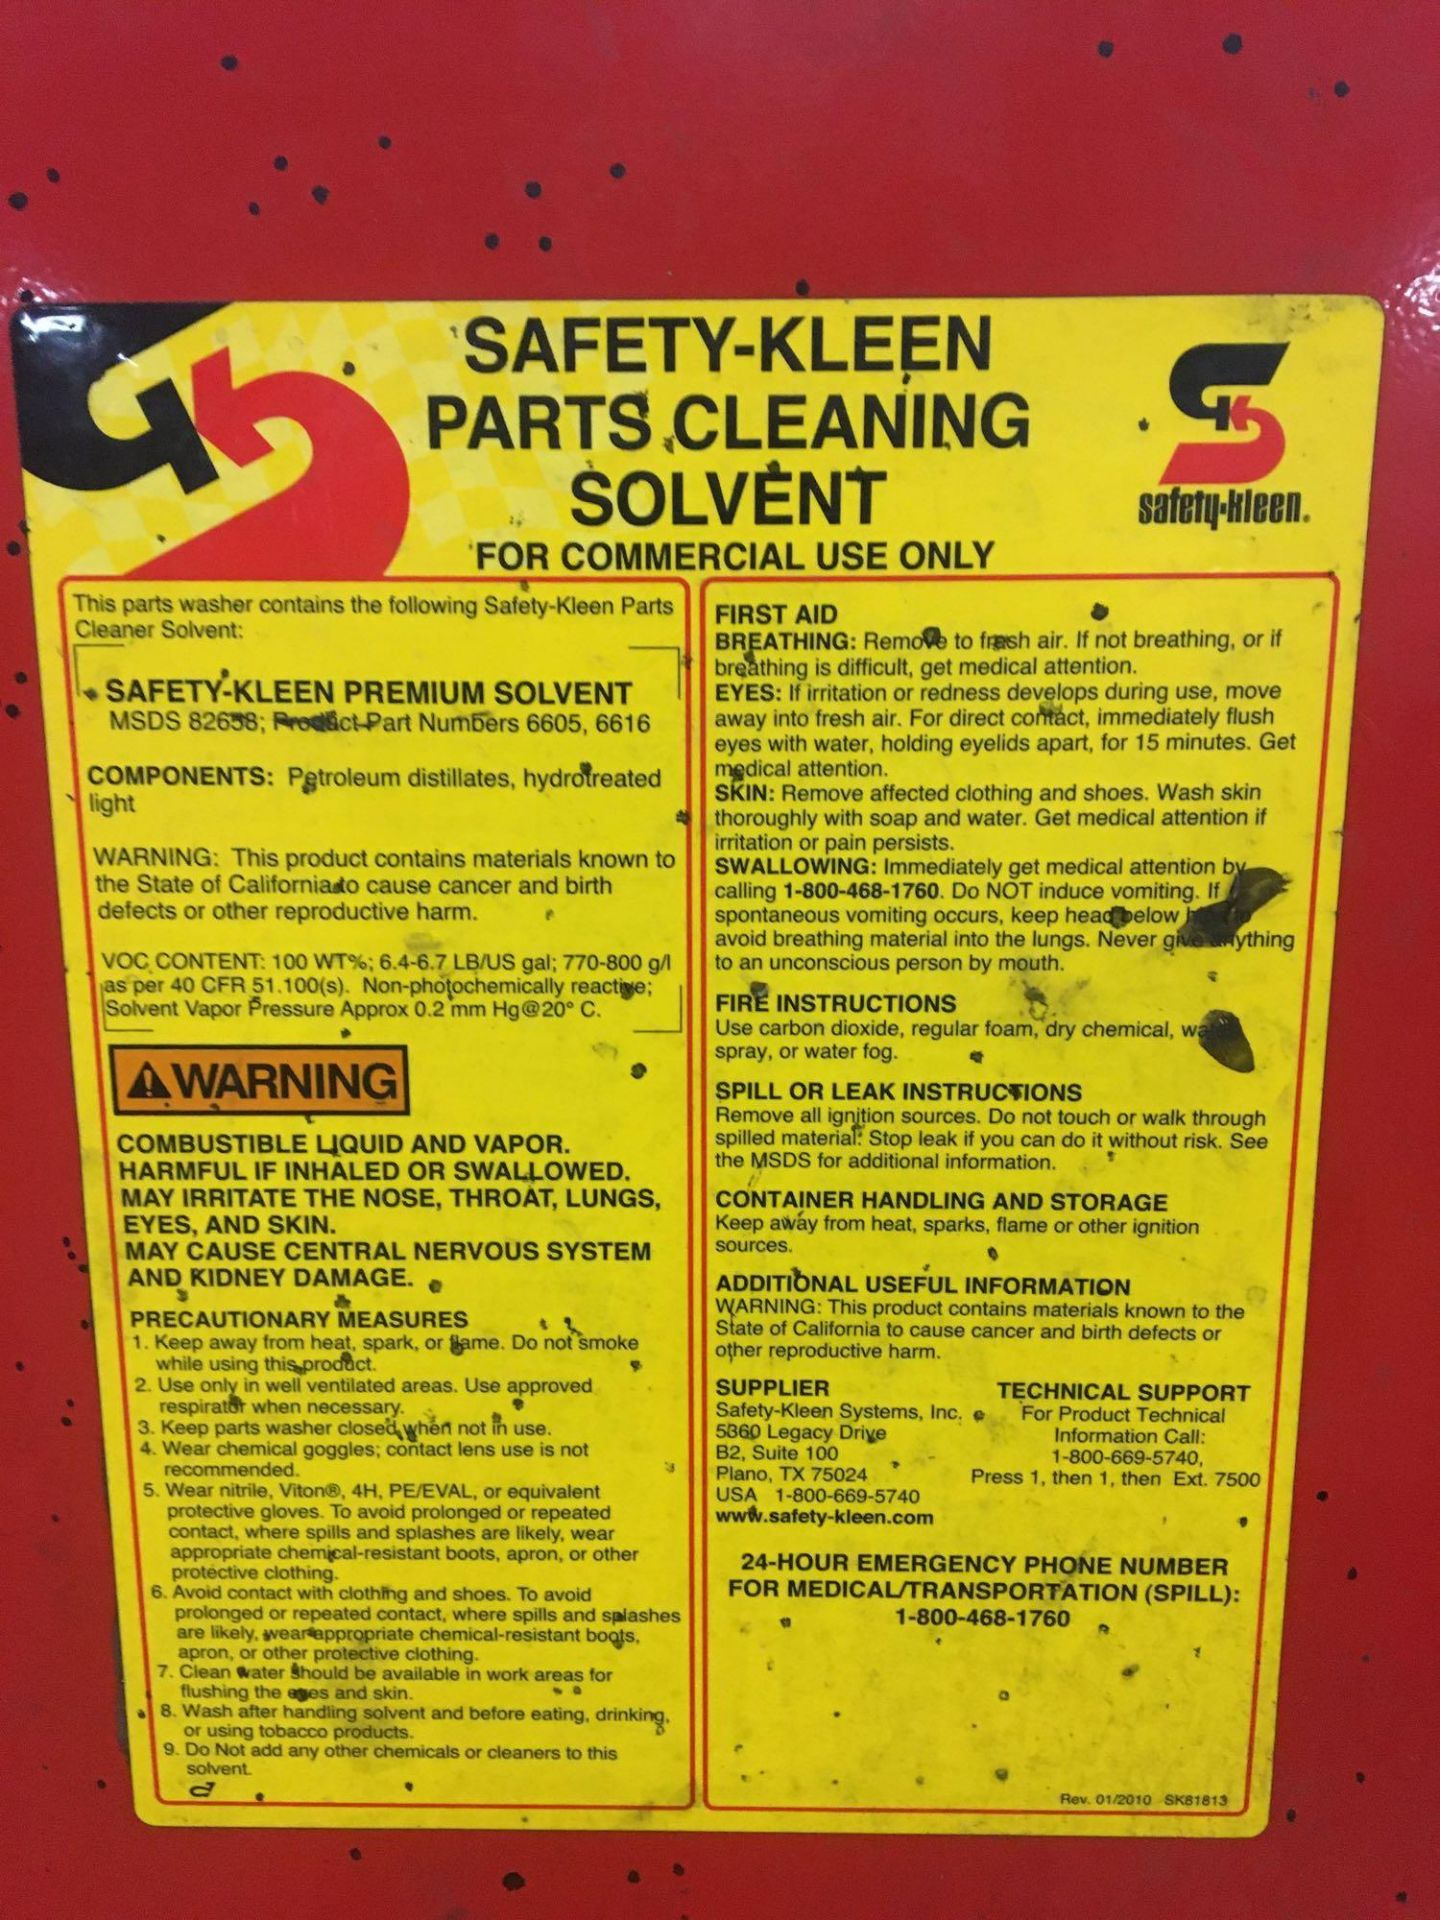 Safety-Kleen Parts Cleaning Station - Image 4 of 4